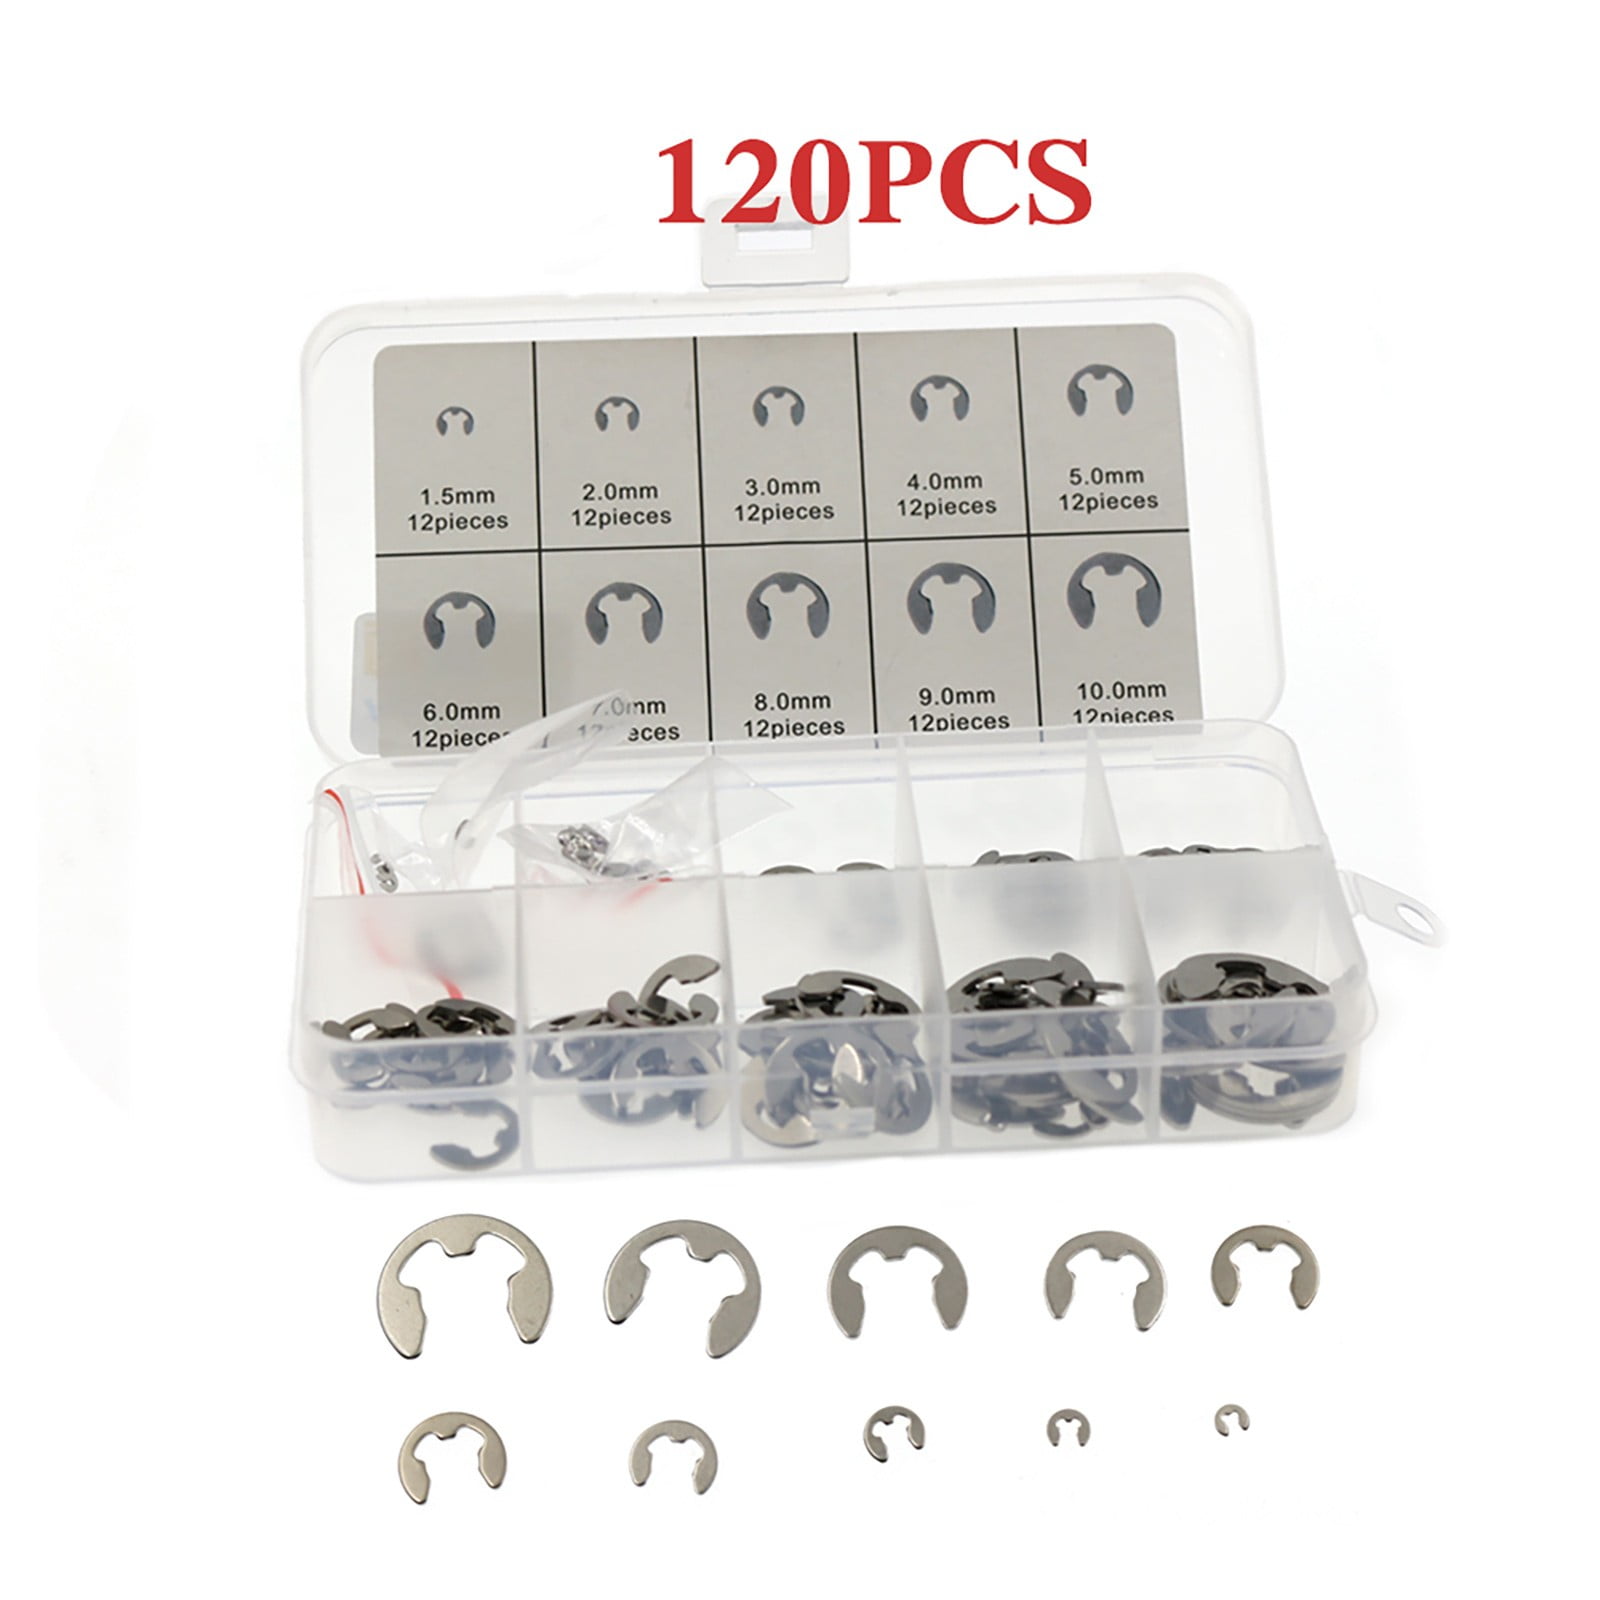 120pcs Stainless Steel Snap Retaining Ring Circlip Assortment Set with Box 9mm-14mm 